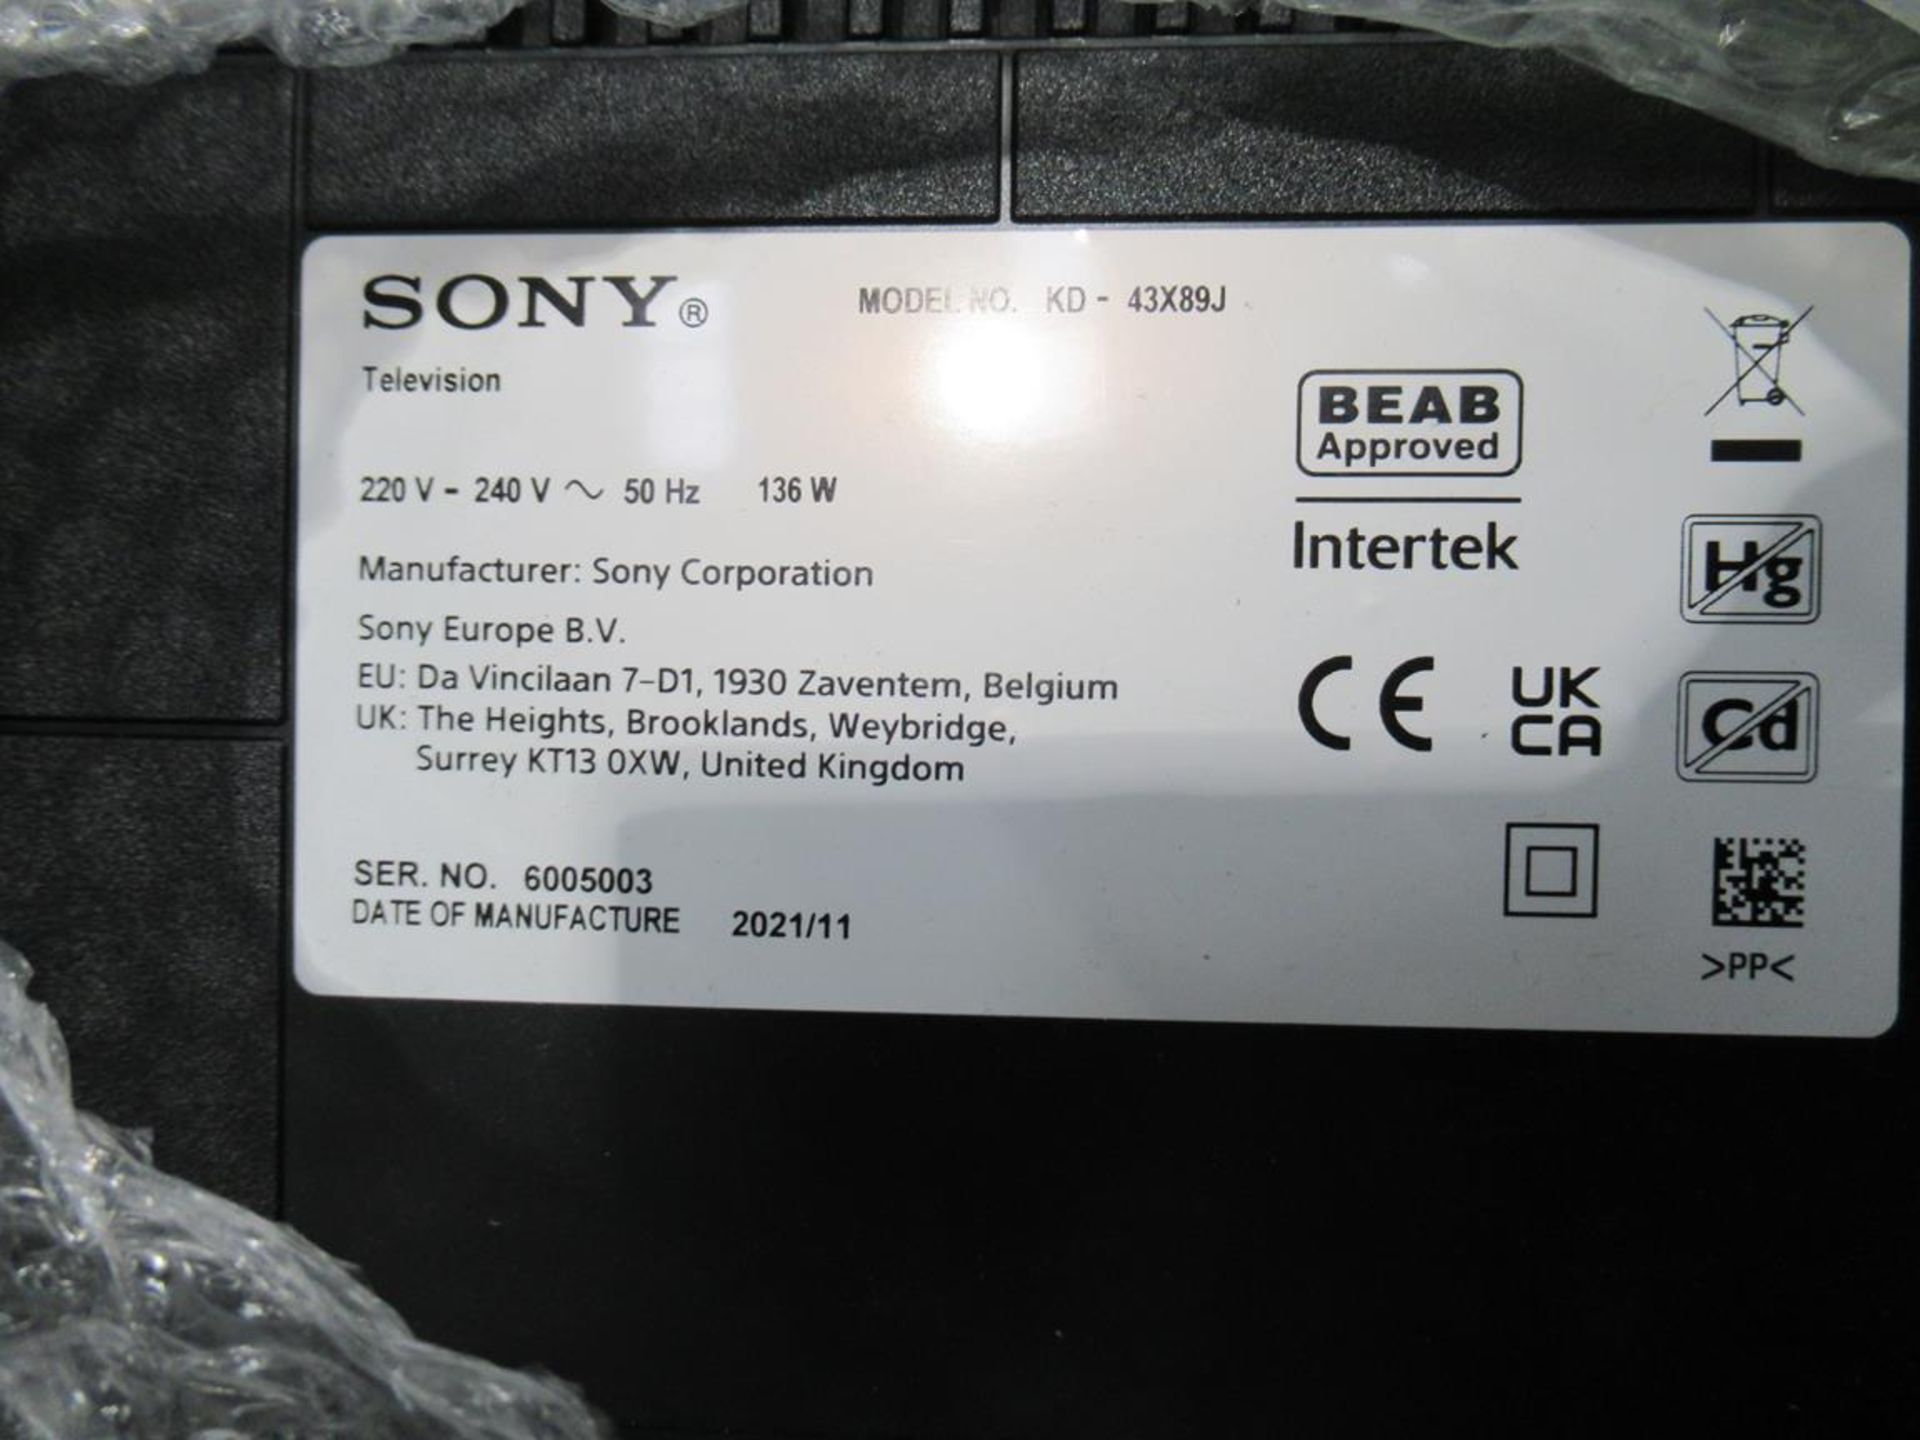 Sony, KD-43X89J 43" television - Image 3 of 5